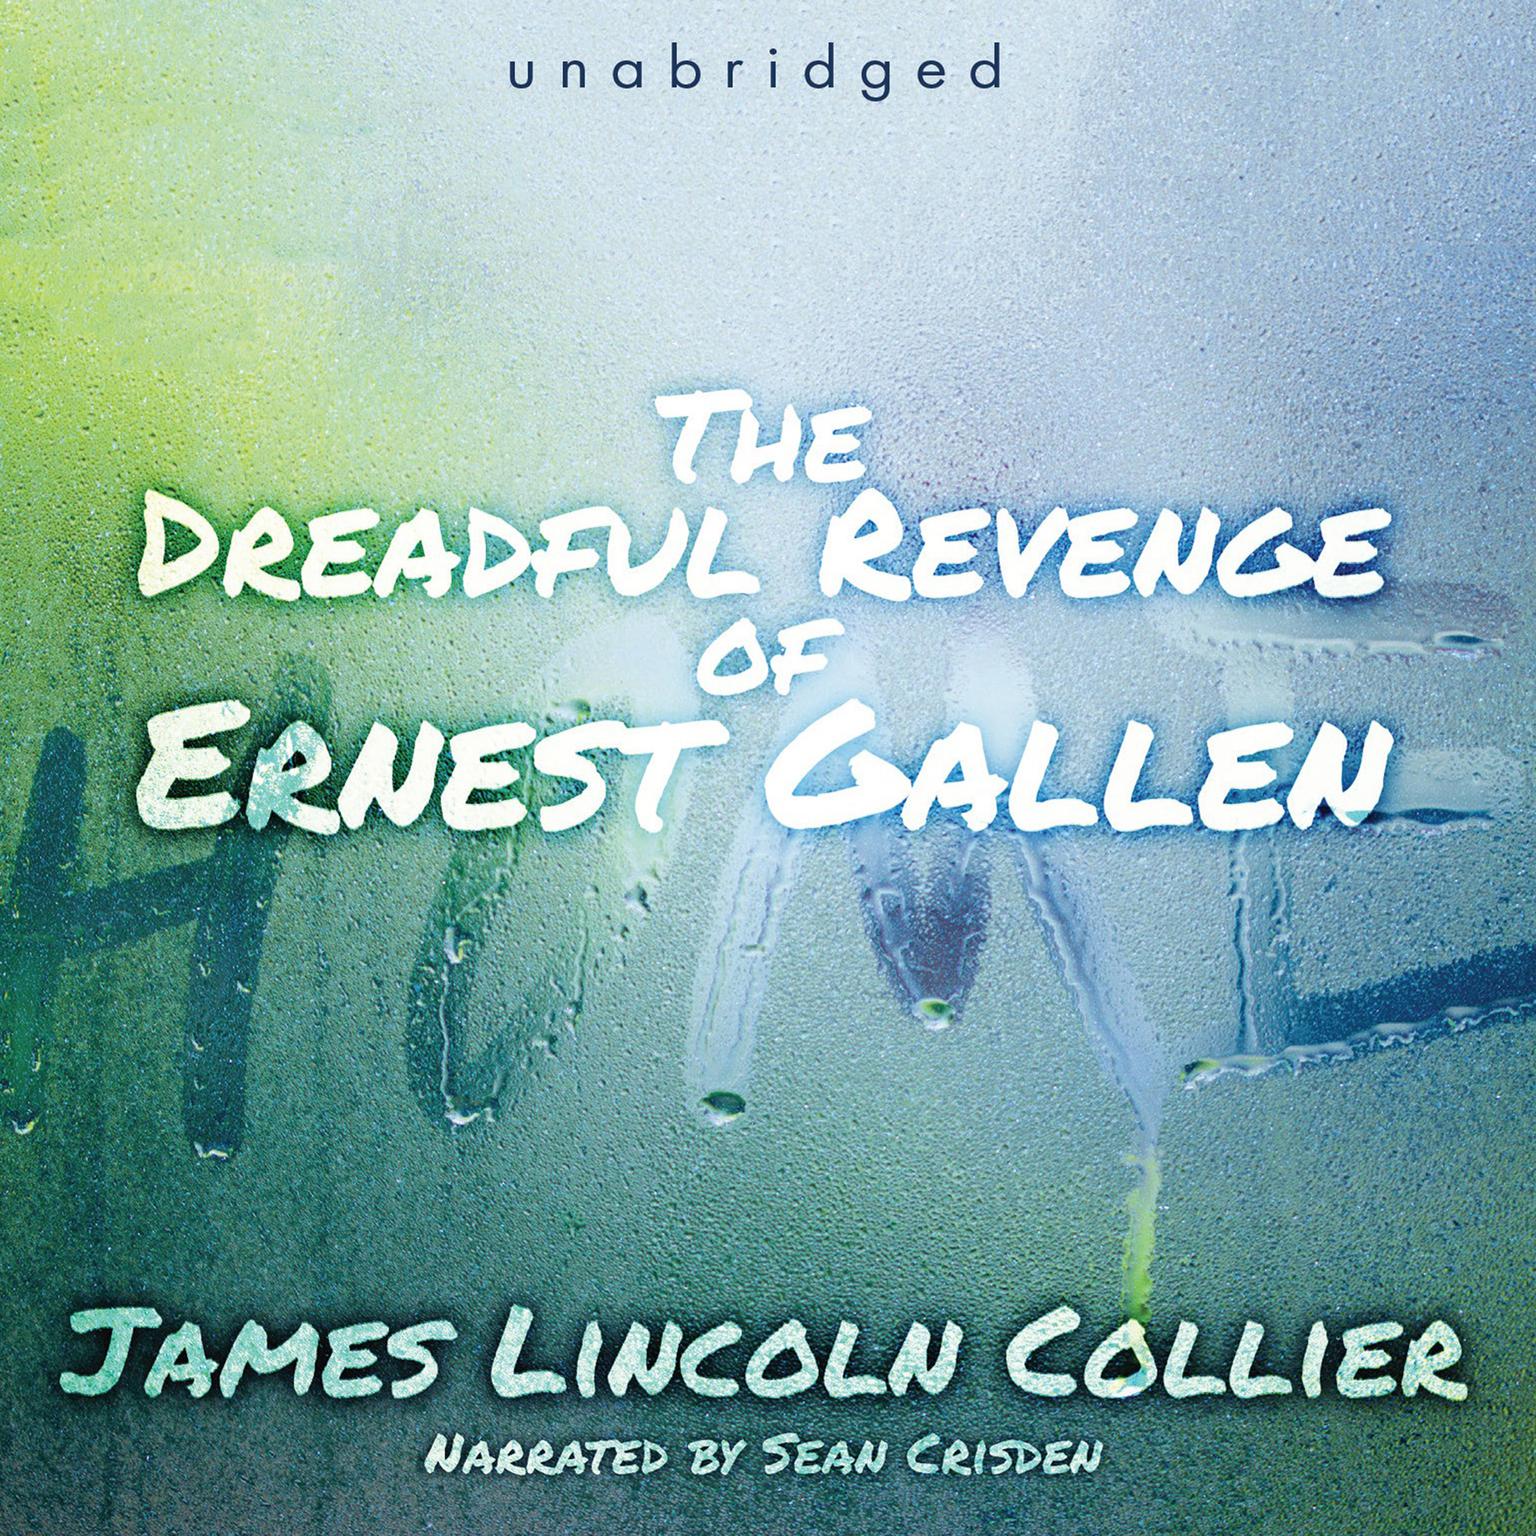 The Dreadful Revenge of Ernest Gallen Audiobook, by James Lincoln Collier